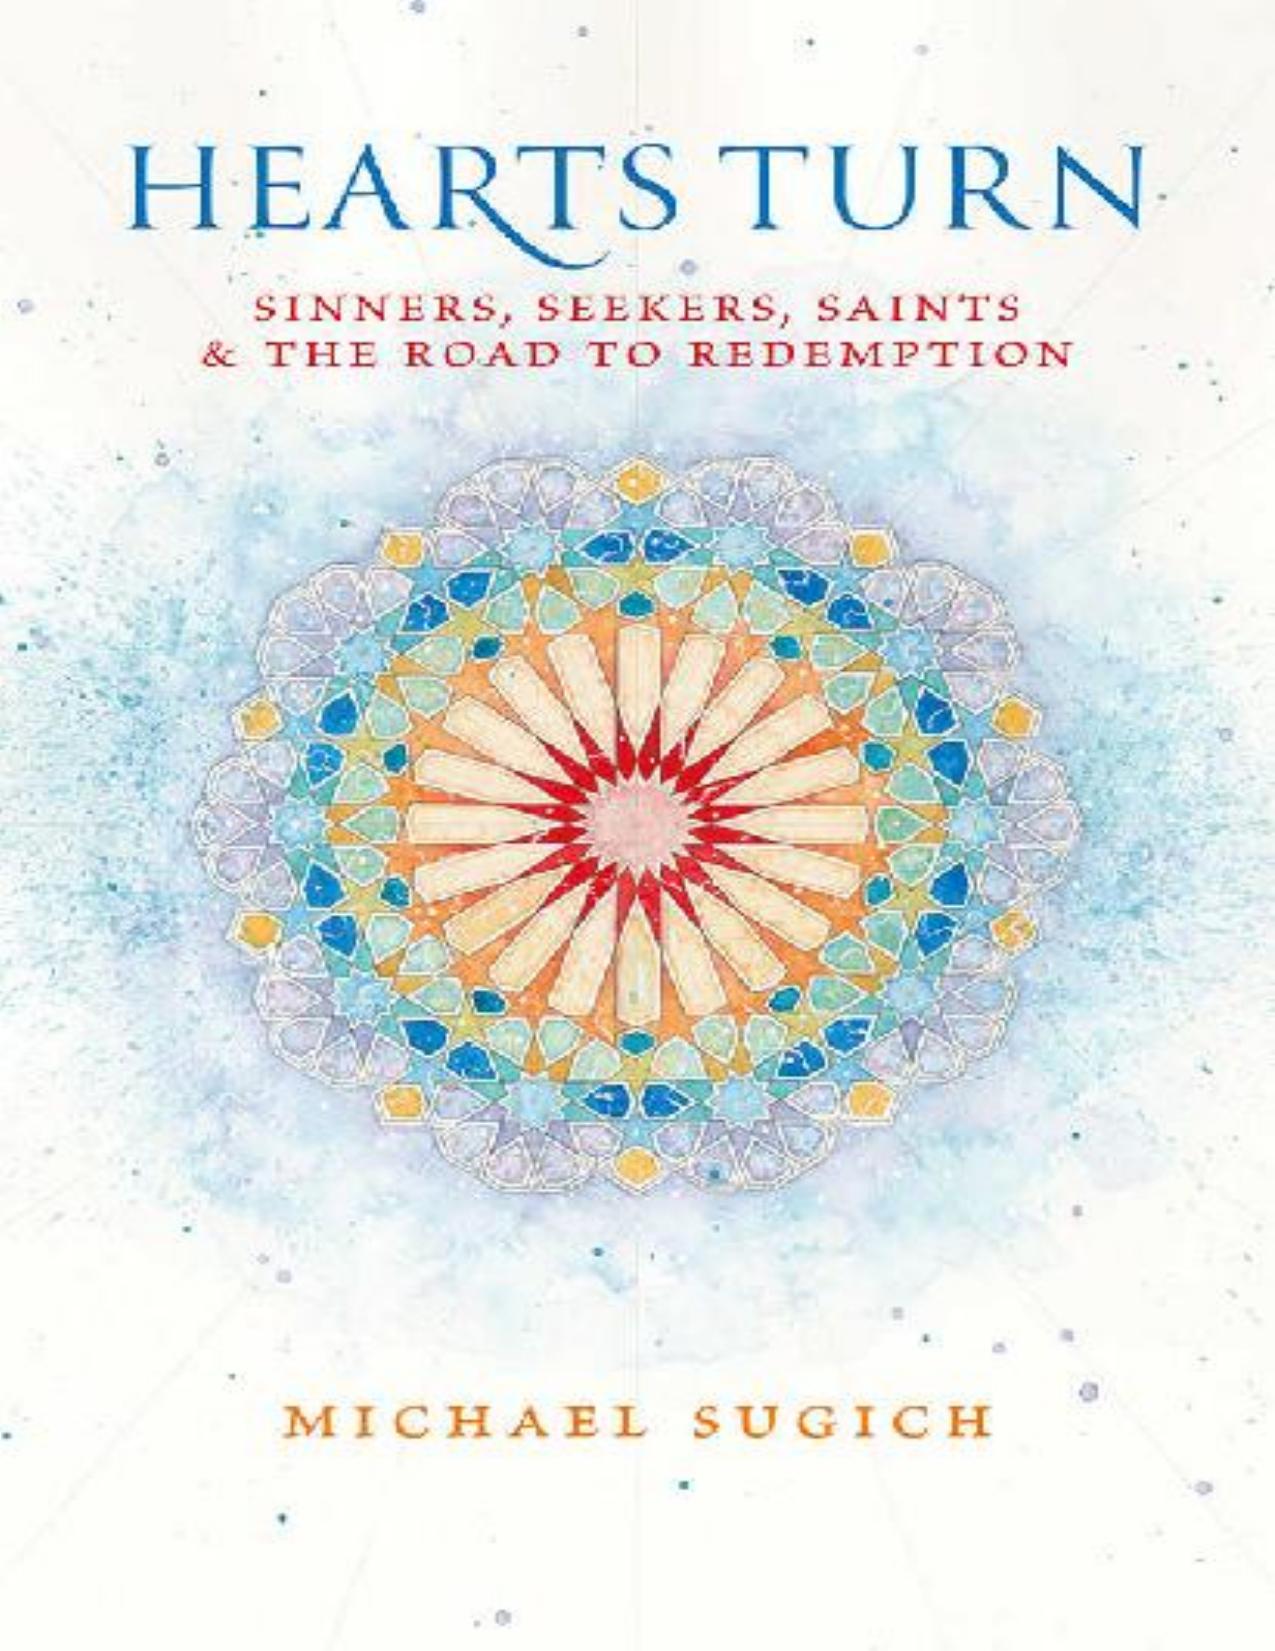 (eBook PDF)Hearts Turn: Sinners, Seekers, Saints and the Road to Redemption by Michael Sugich